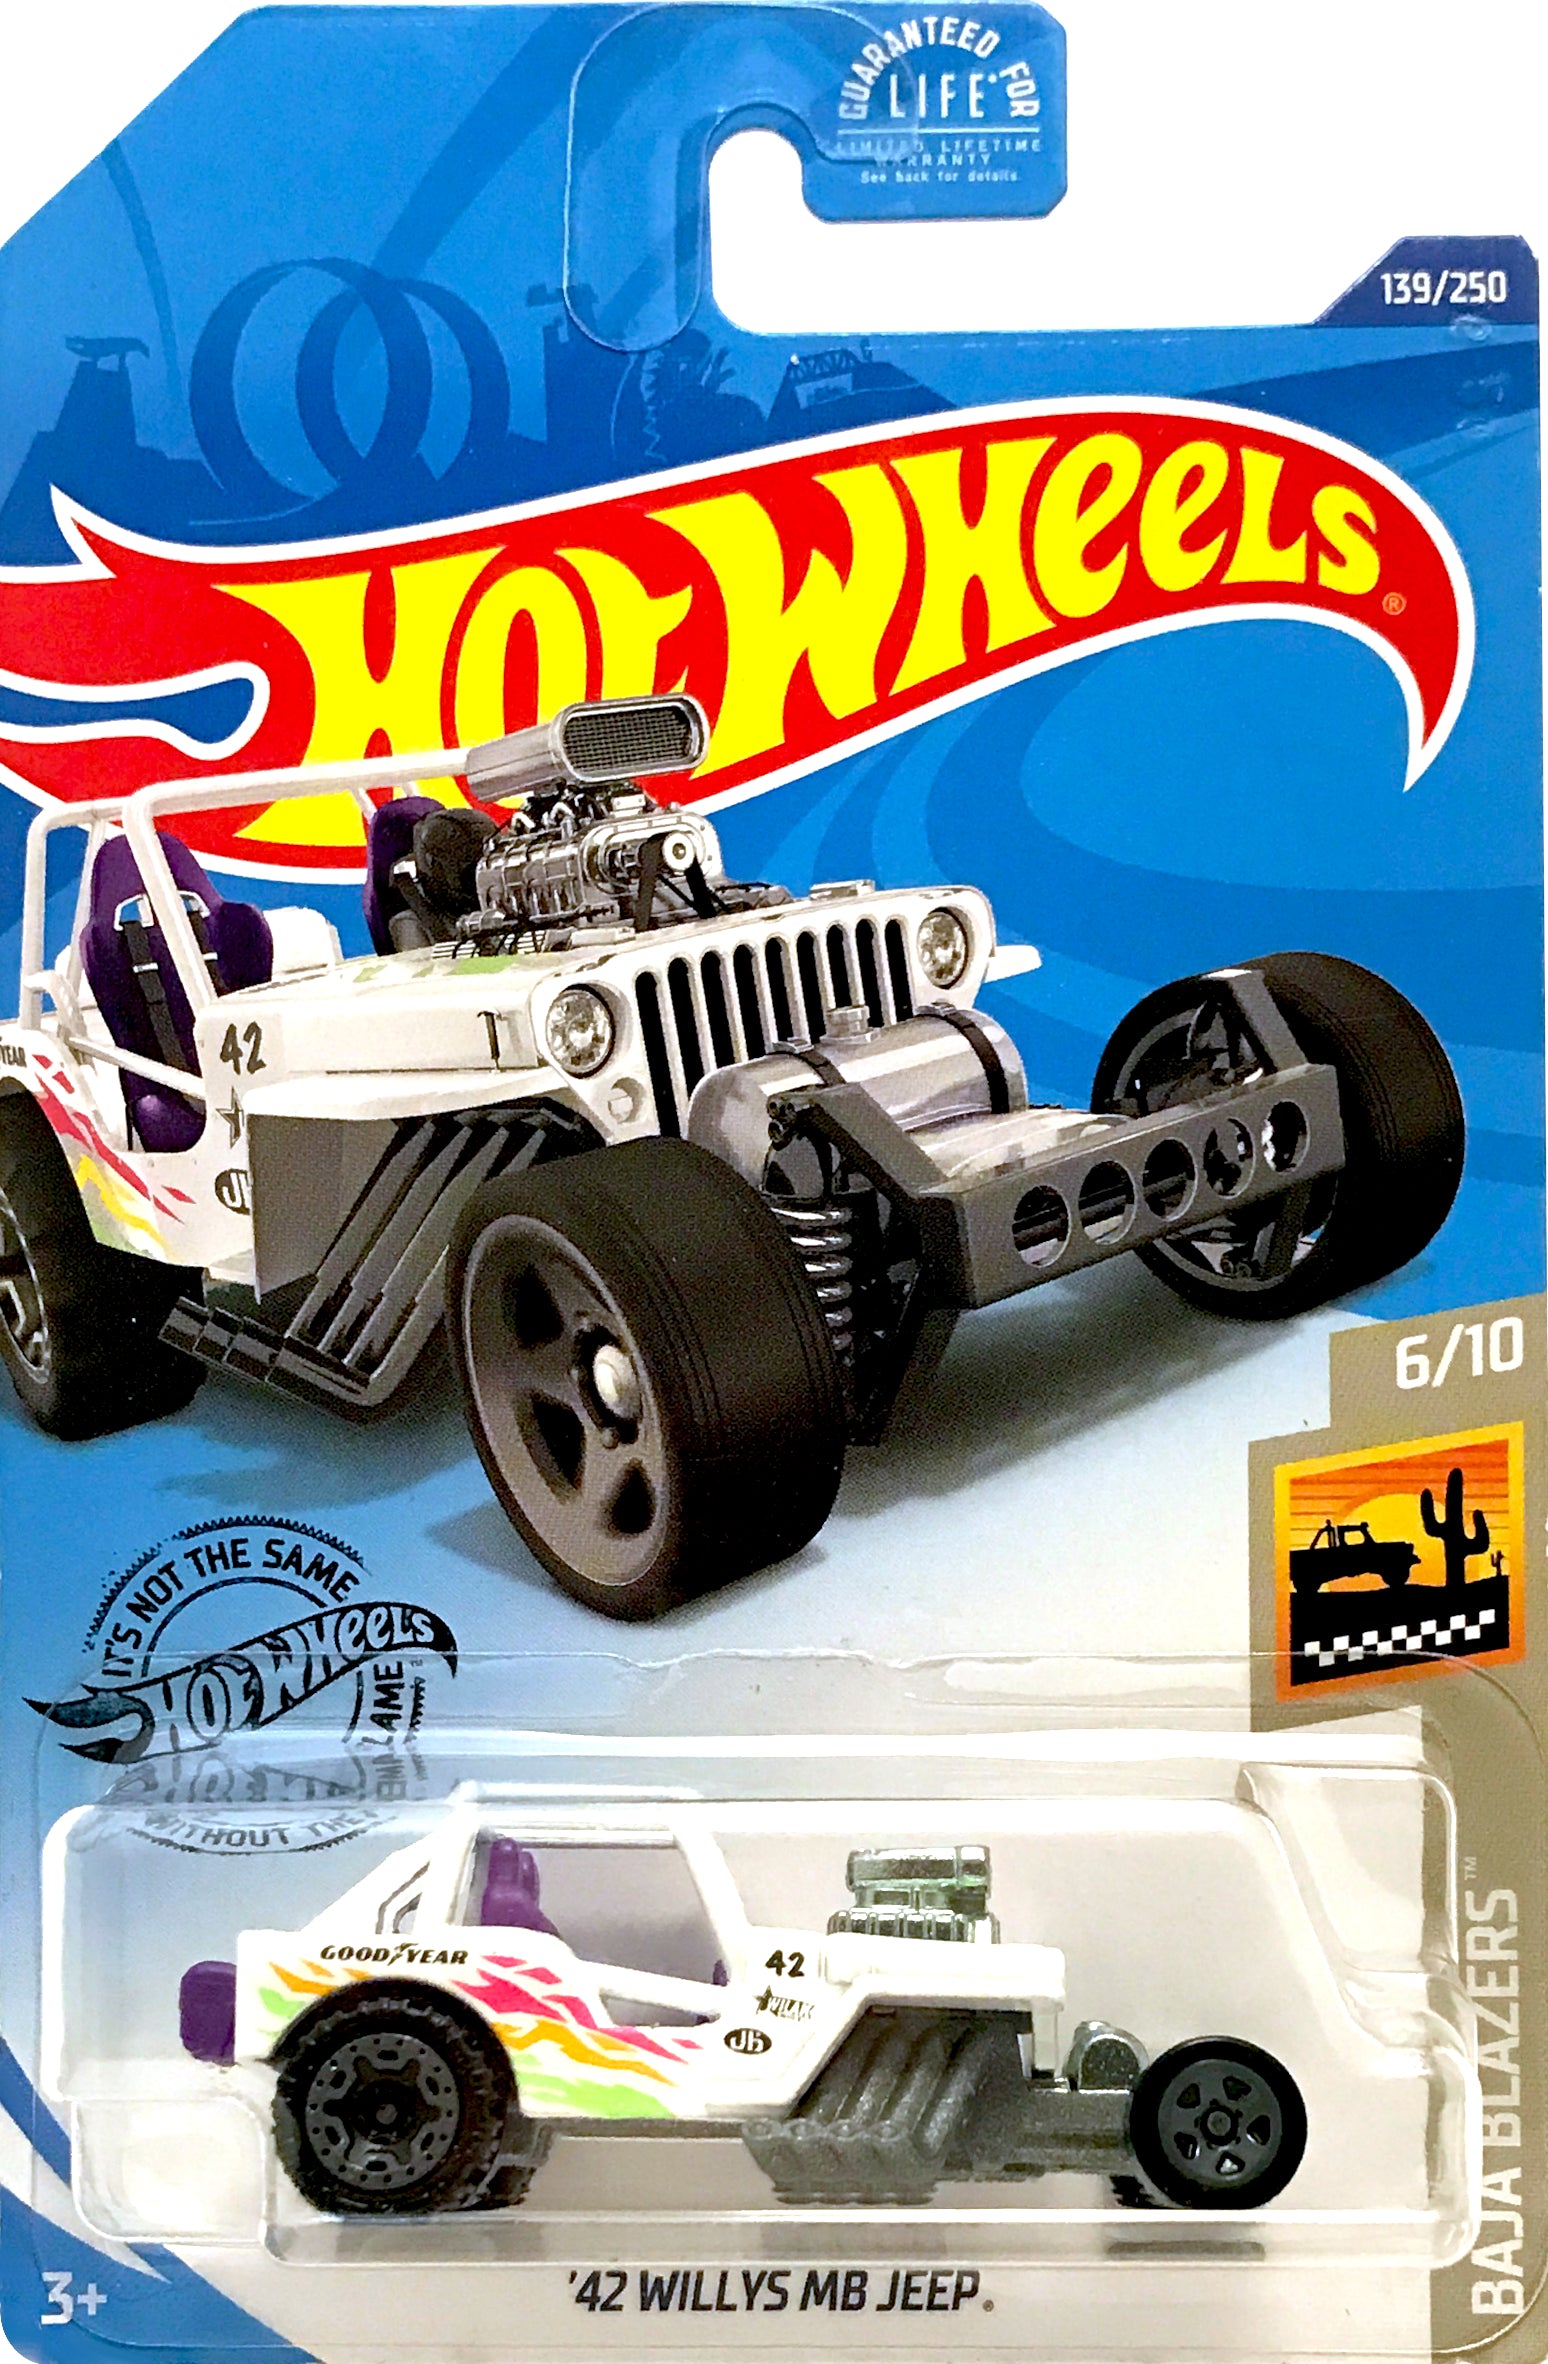 2020 Hot Wheels Mainline #137 - 1942 Willys MB Jeep (White) GHF63